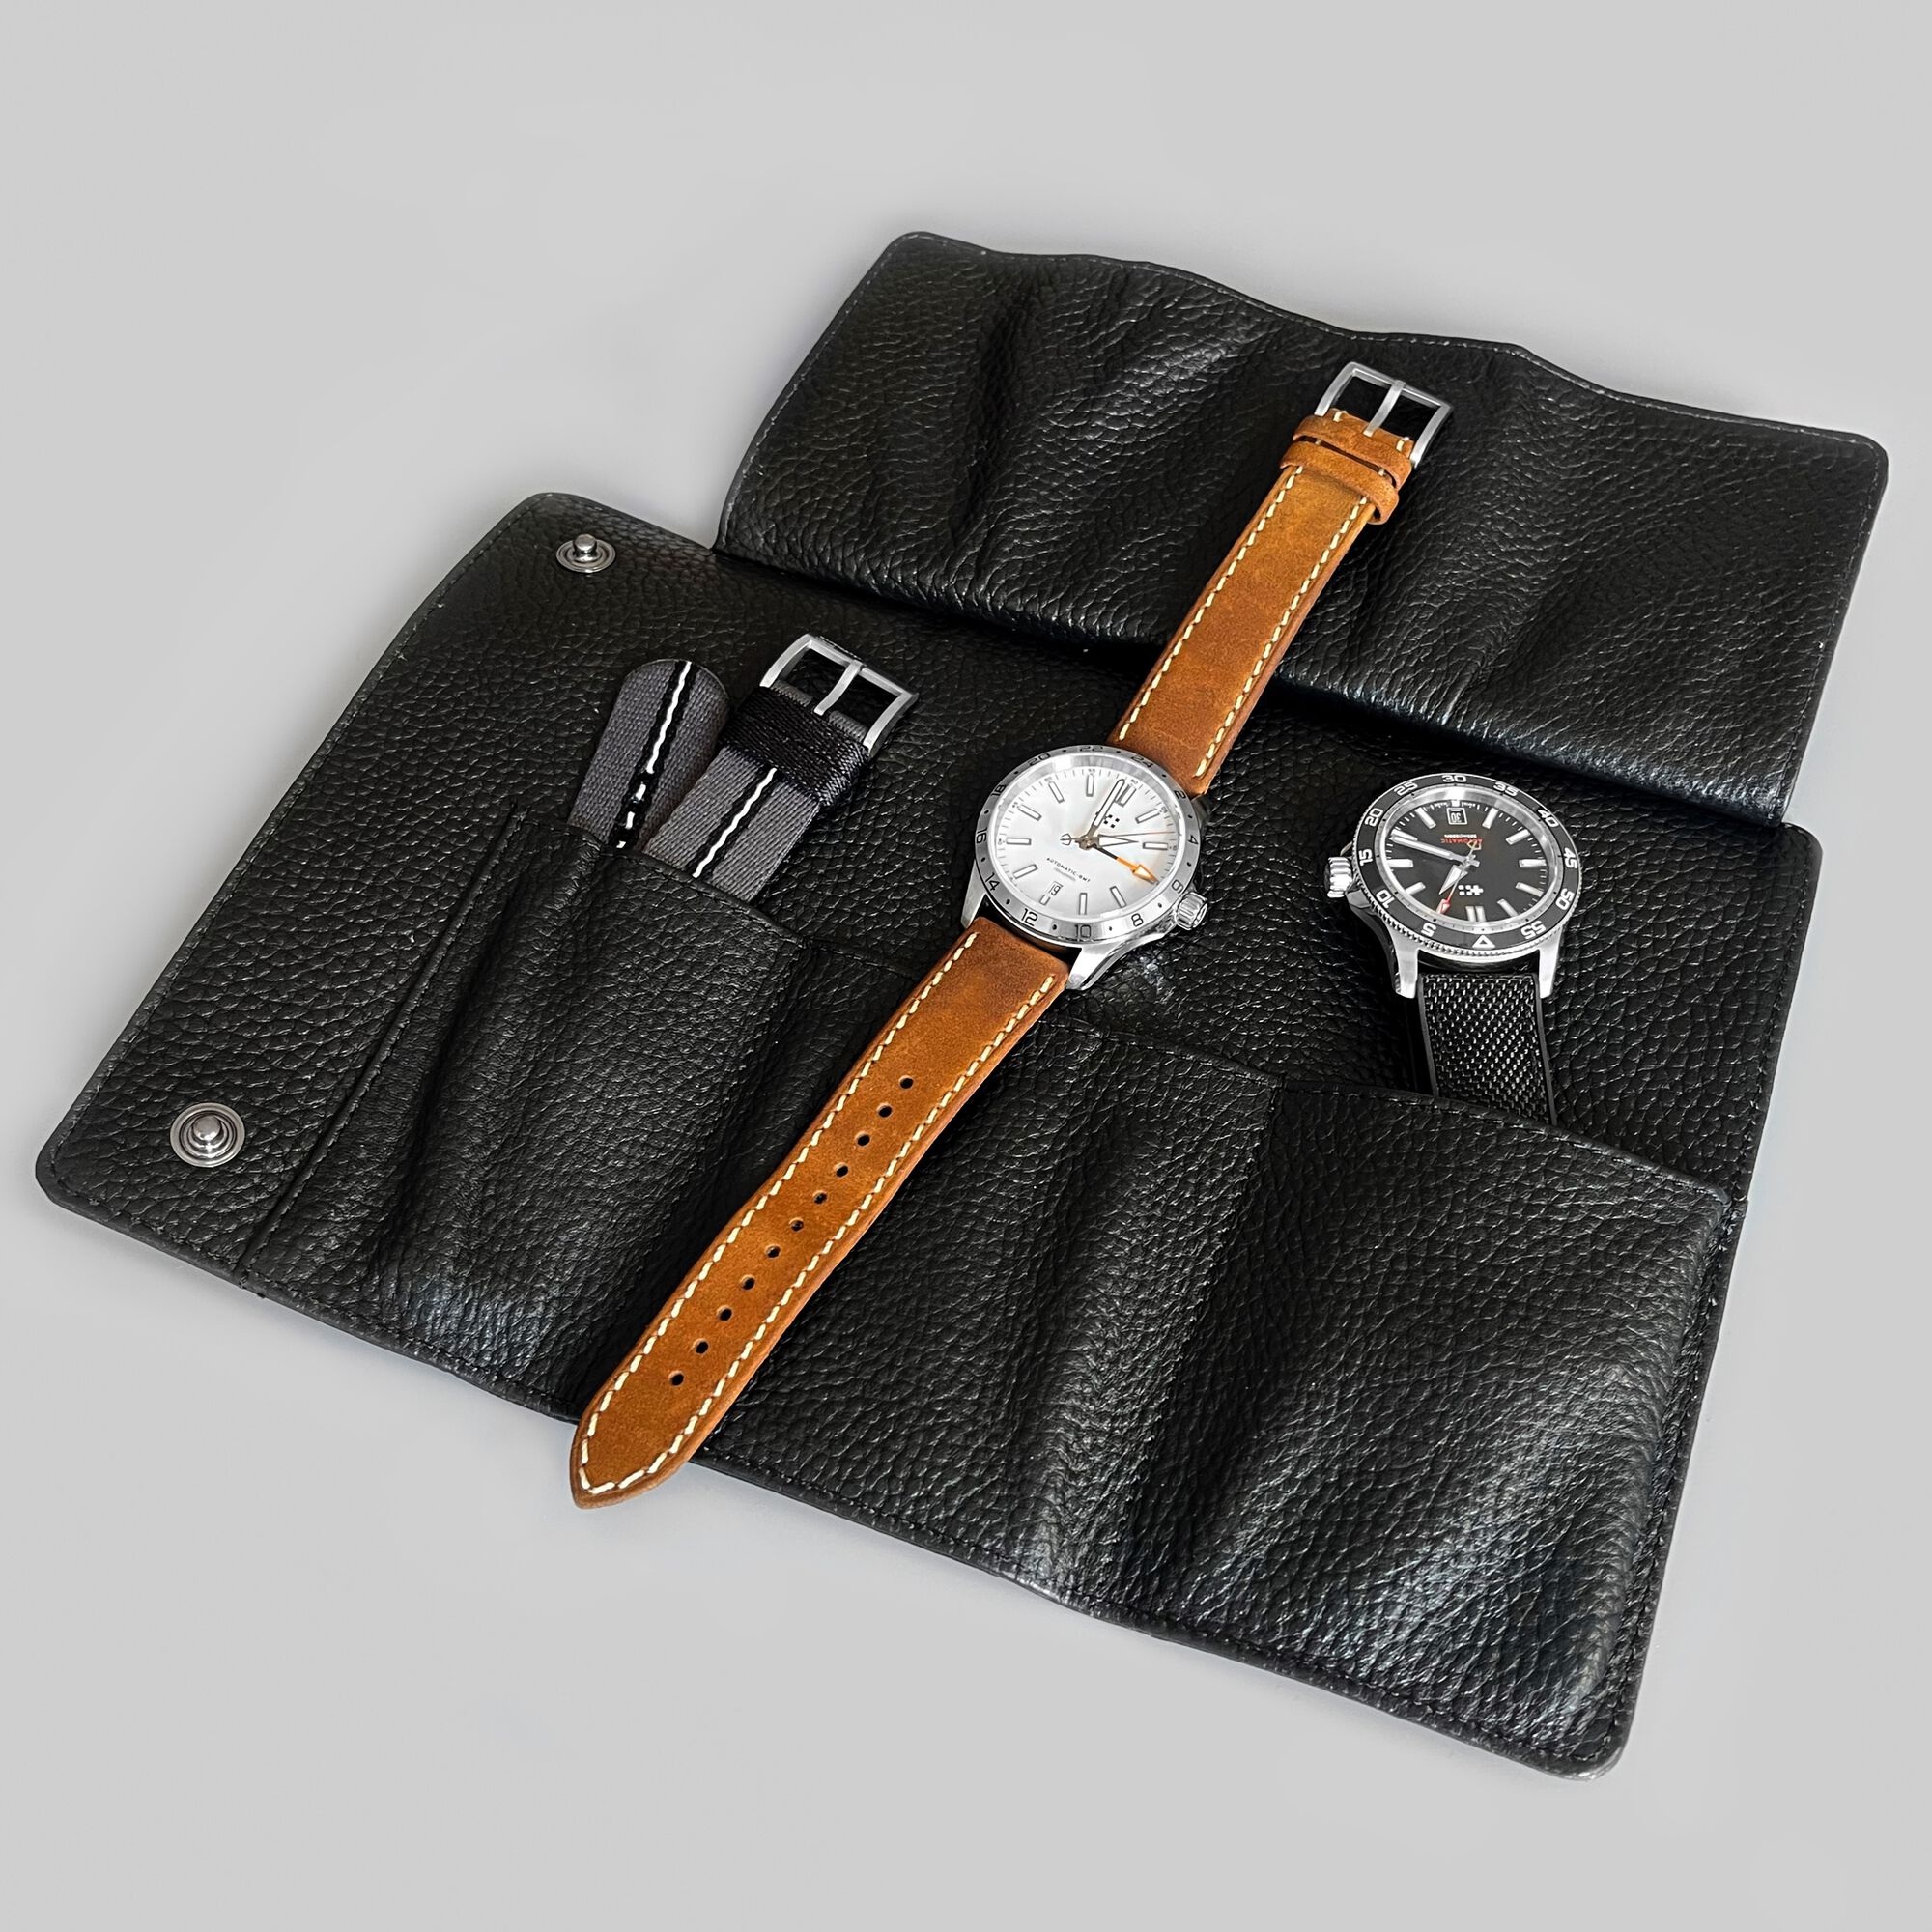 Leather Watch Rolls, Protect & Store Luxury Watches